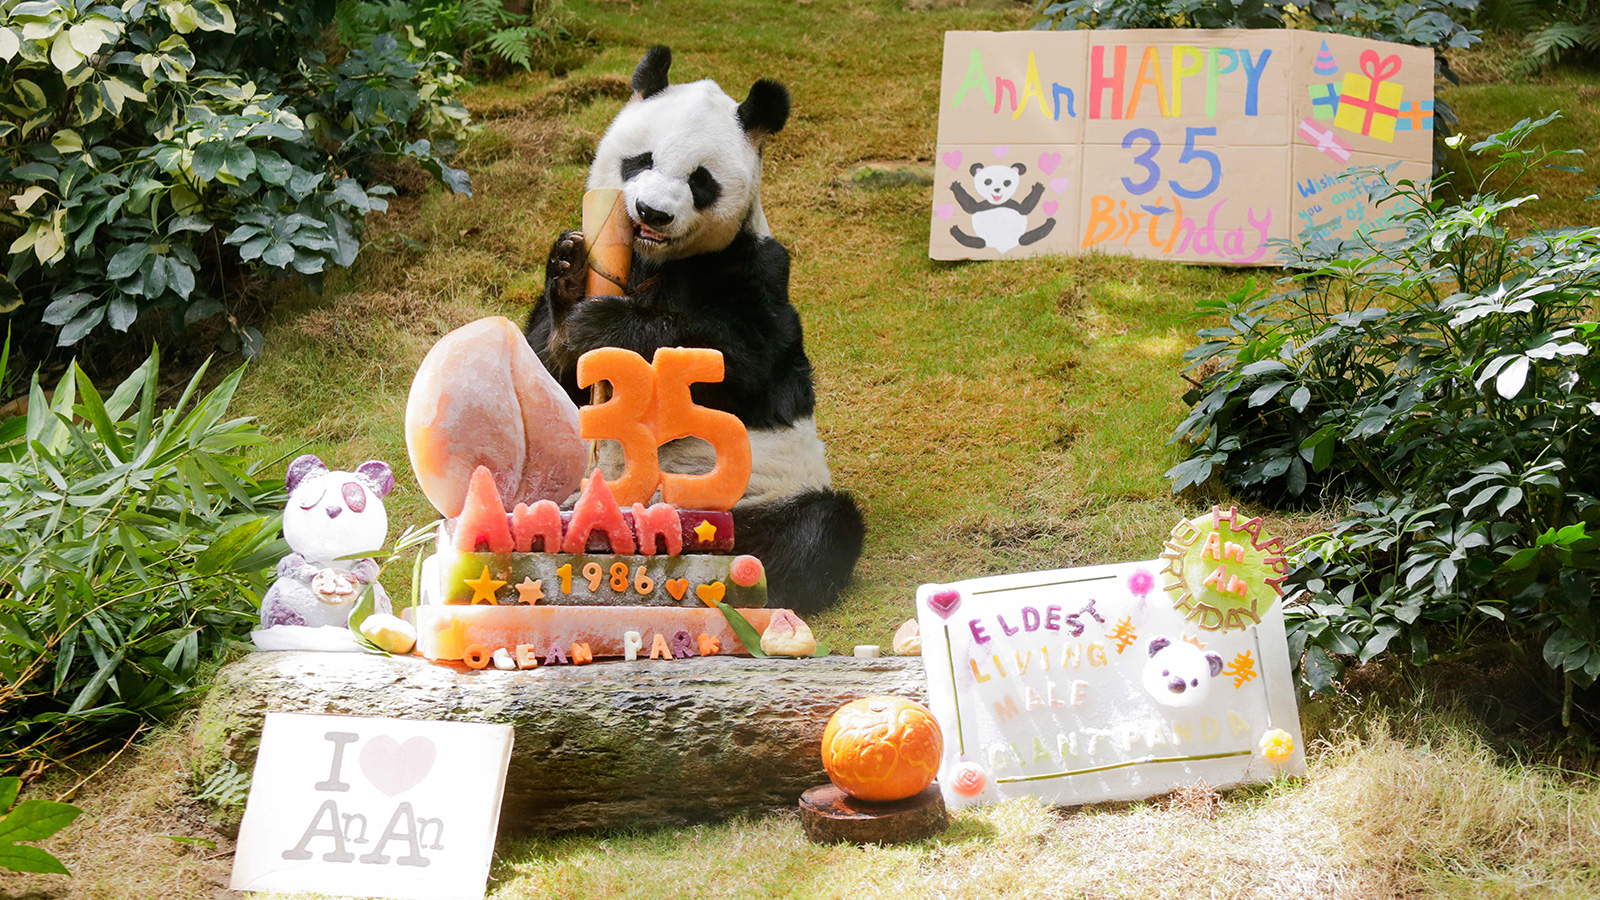 How old is the oldest living panda?